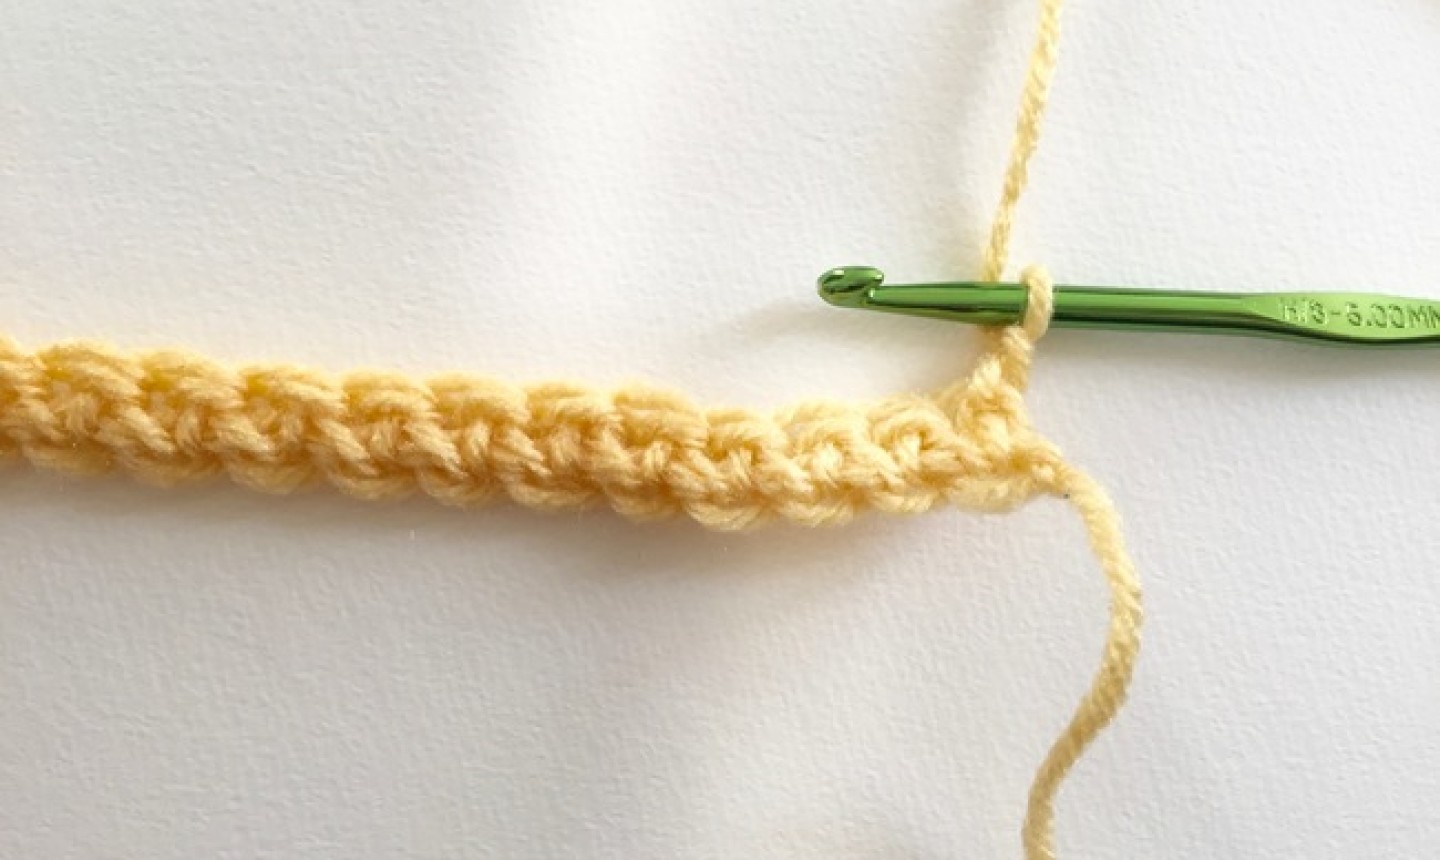 Chain of yellow yarn with green hook